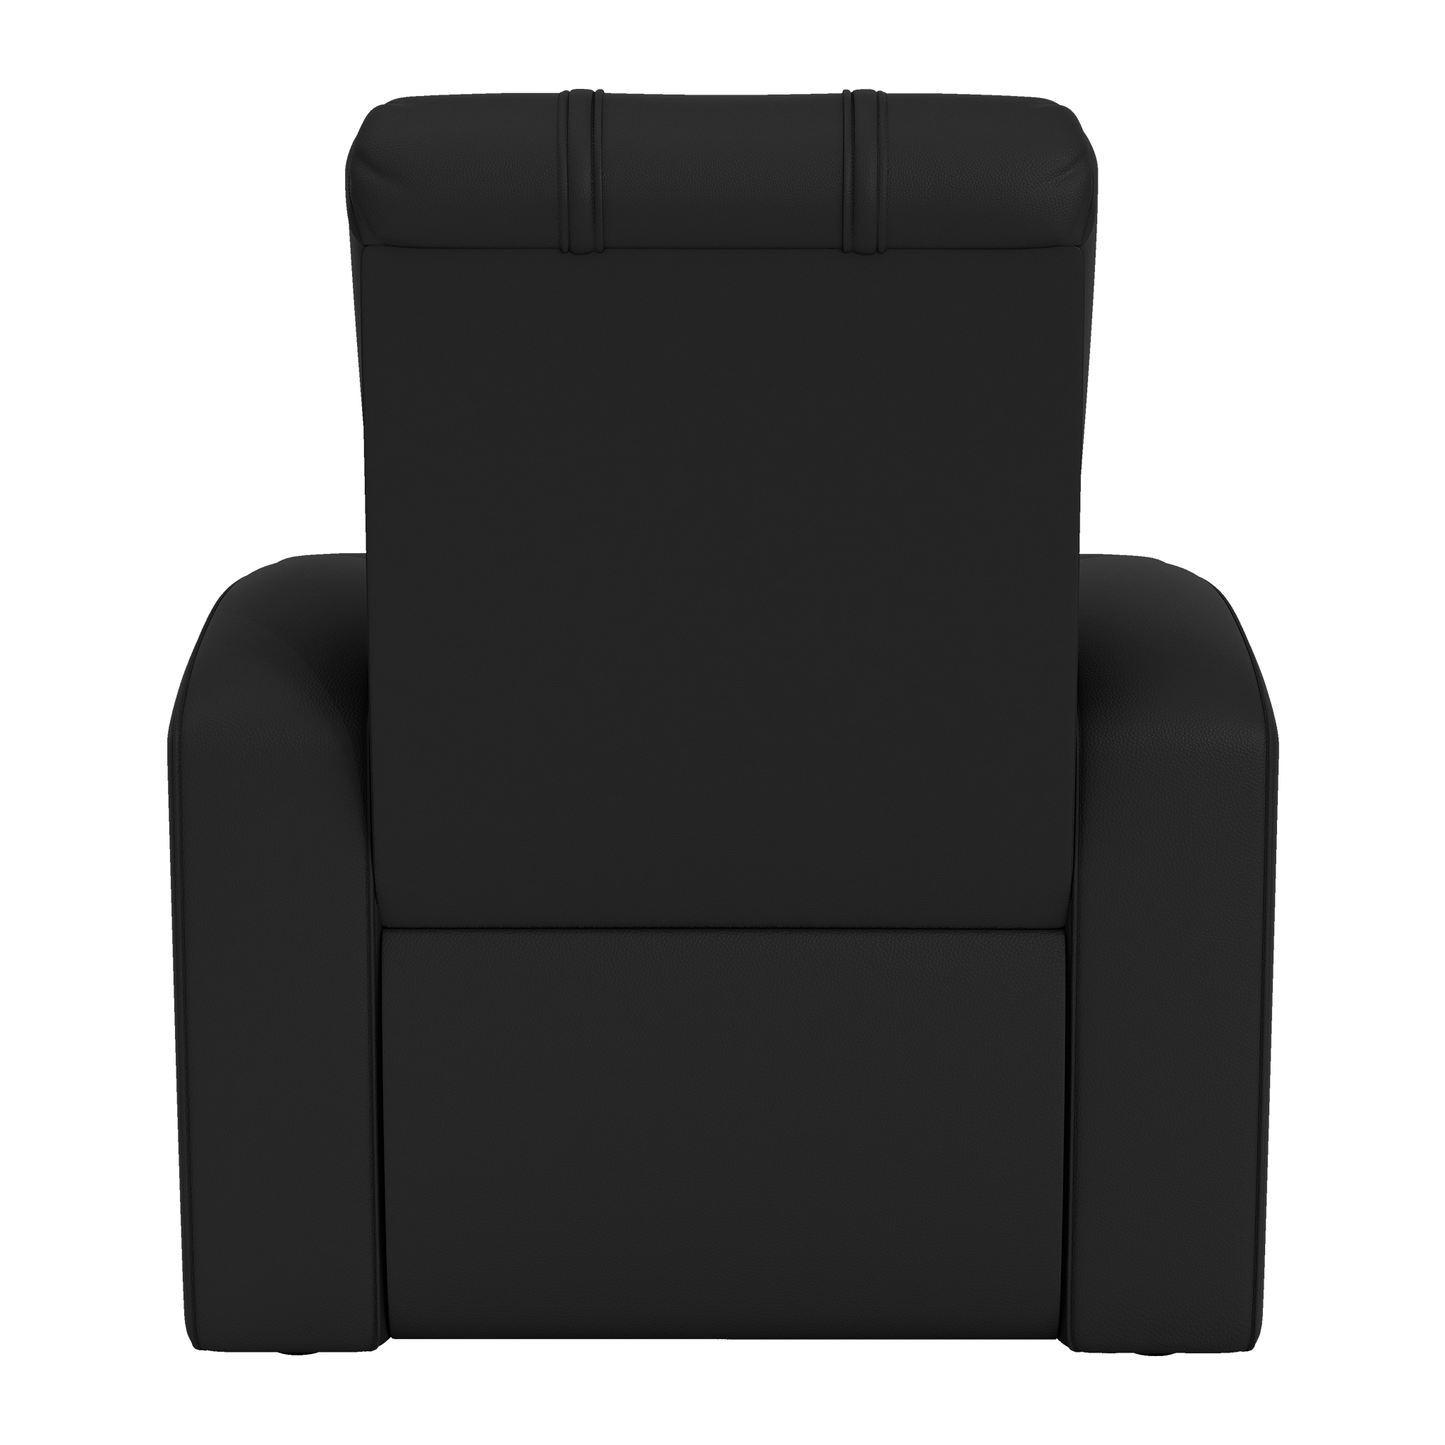 Relax Home Theater Recliner with New York City FC Alternate Logo